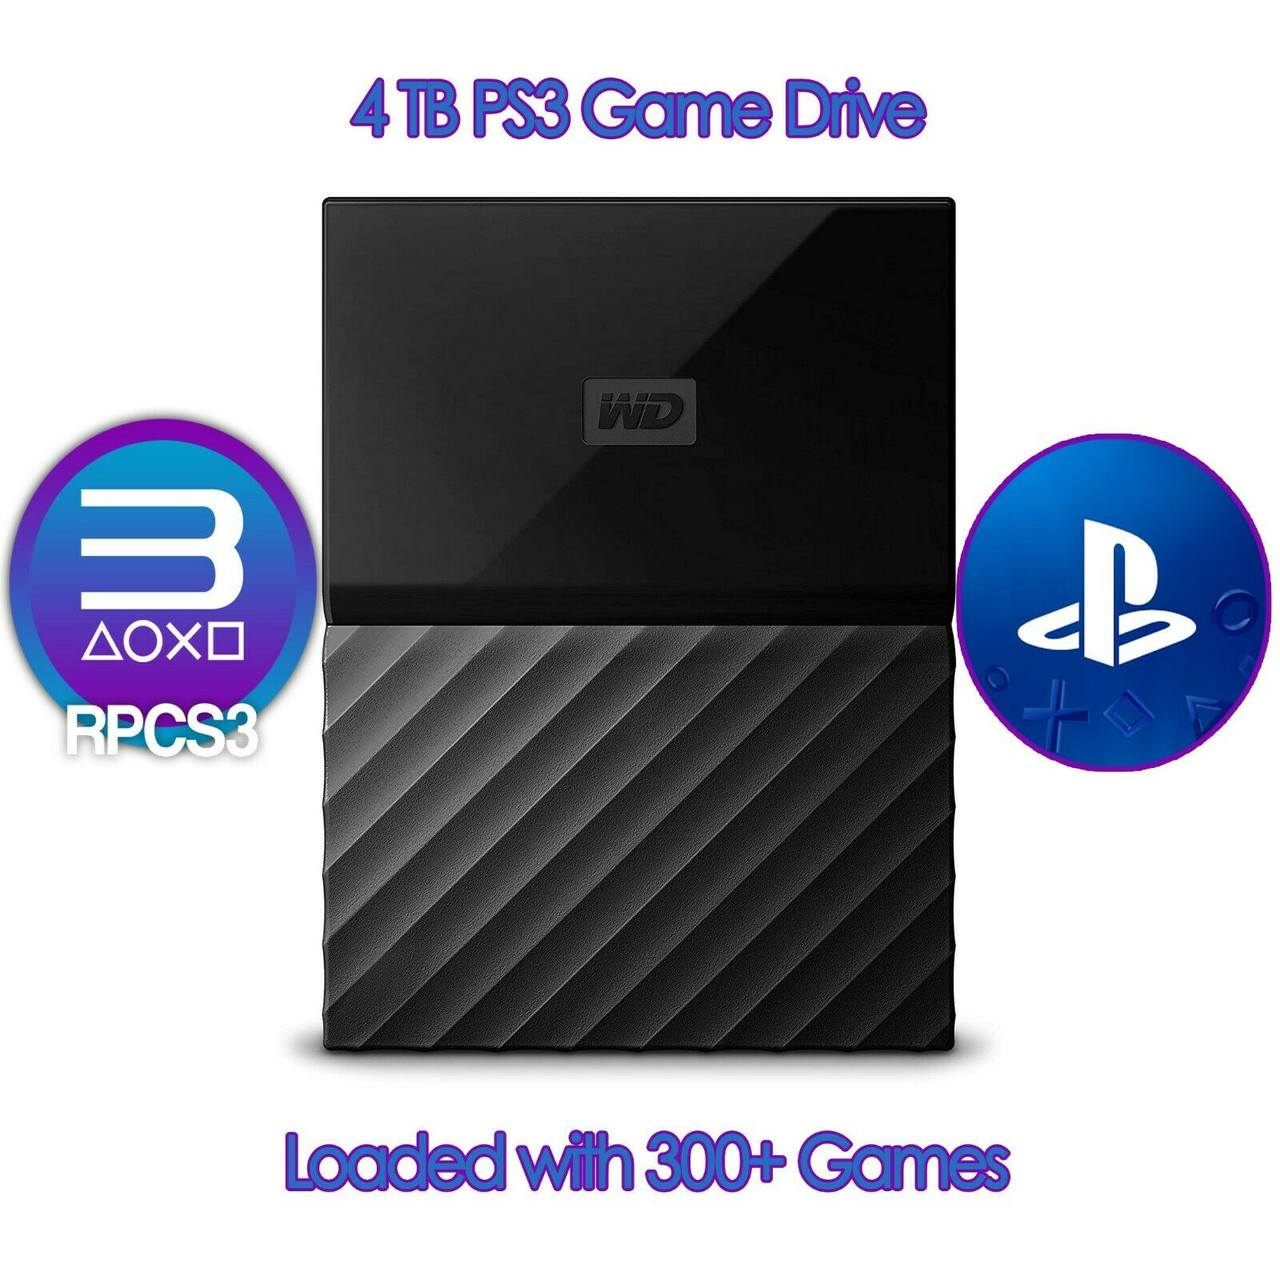 4TB USB Game Hard Drive - RPCS3 for PC / PS3 Console Loaded 300+